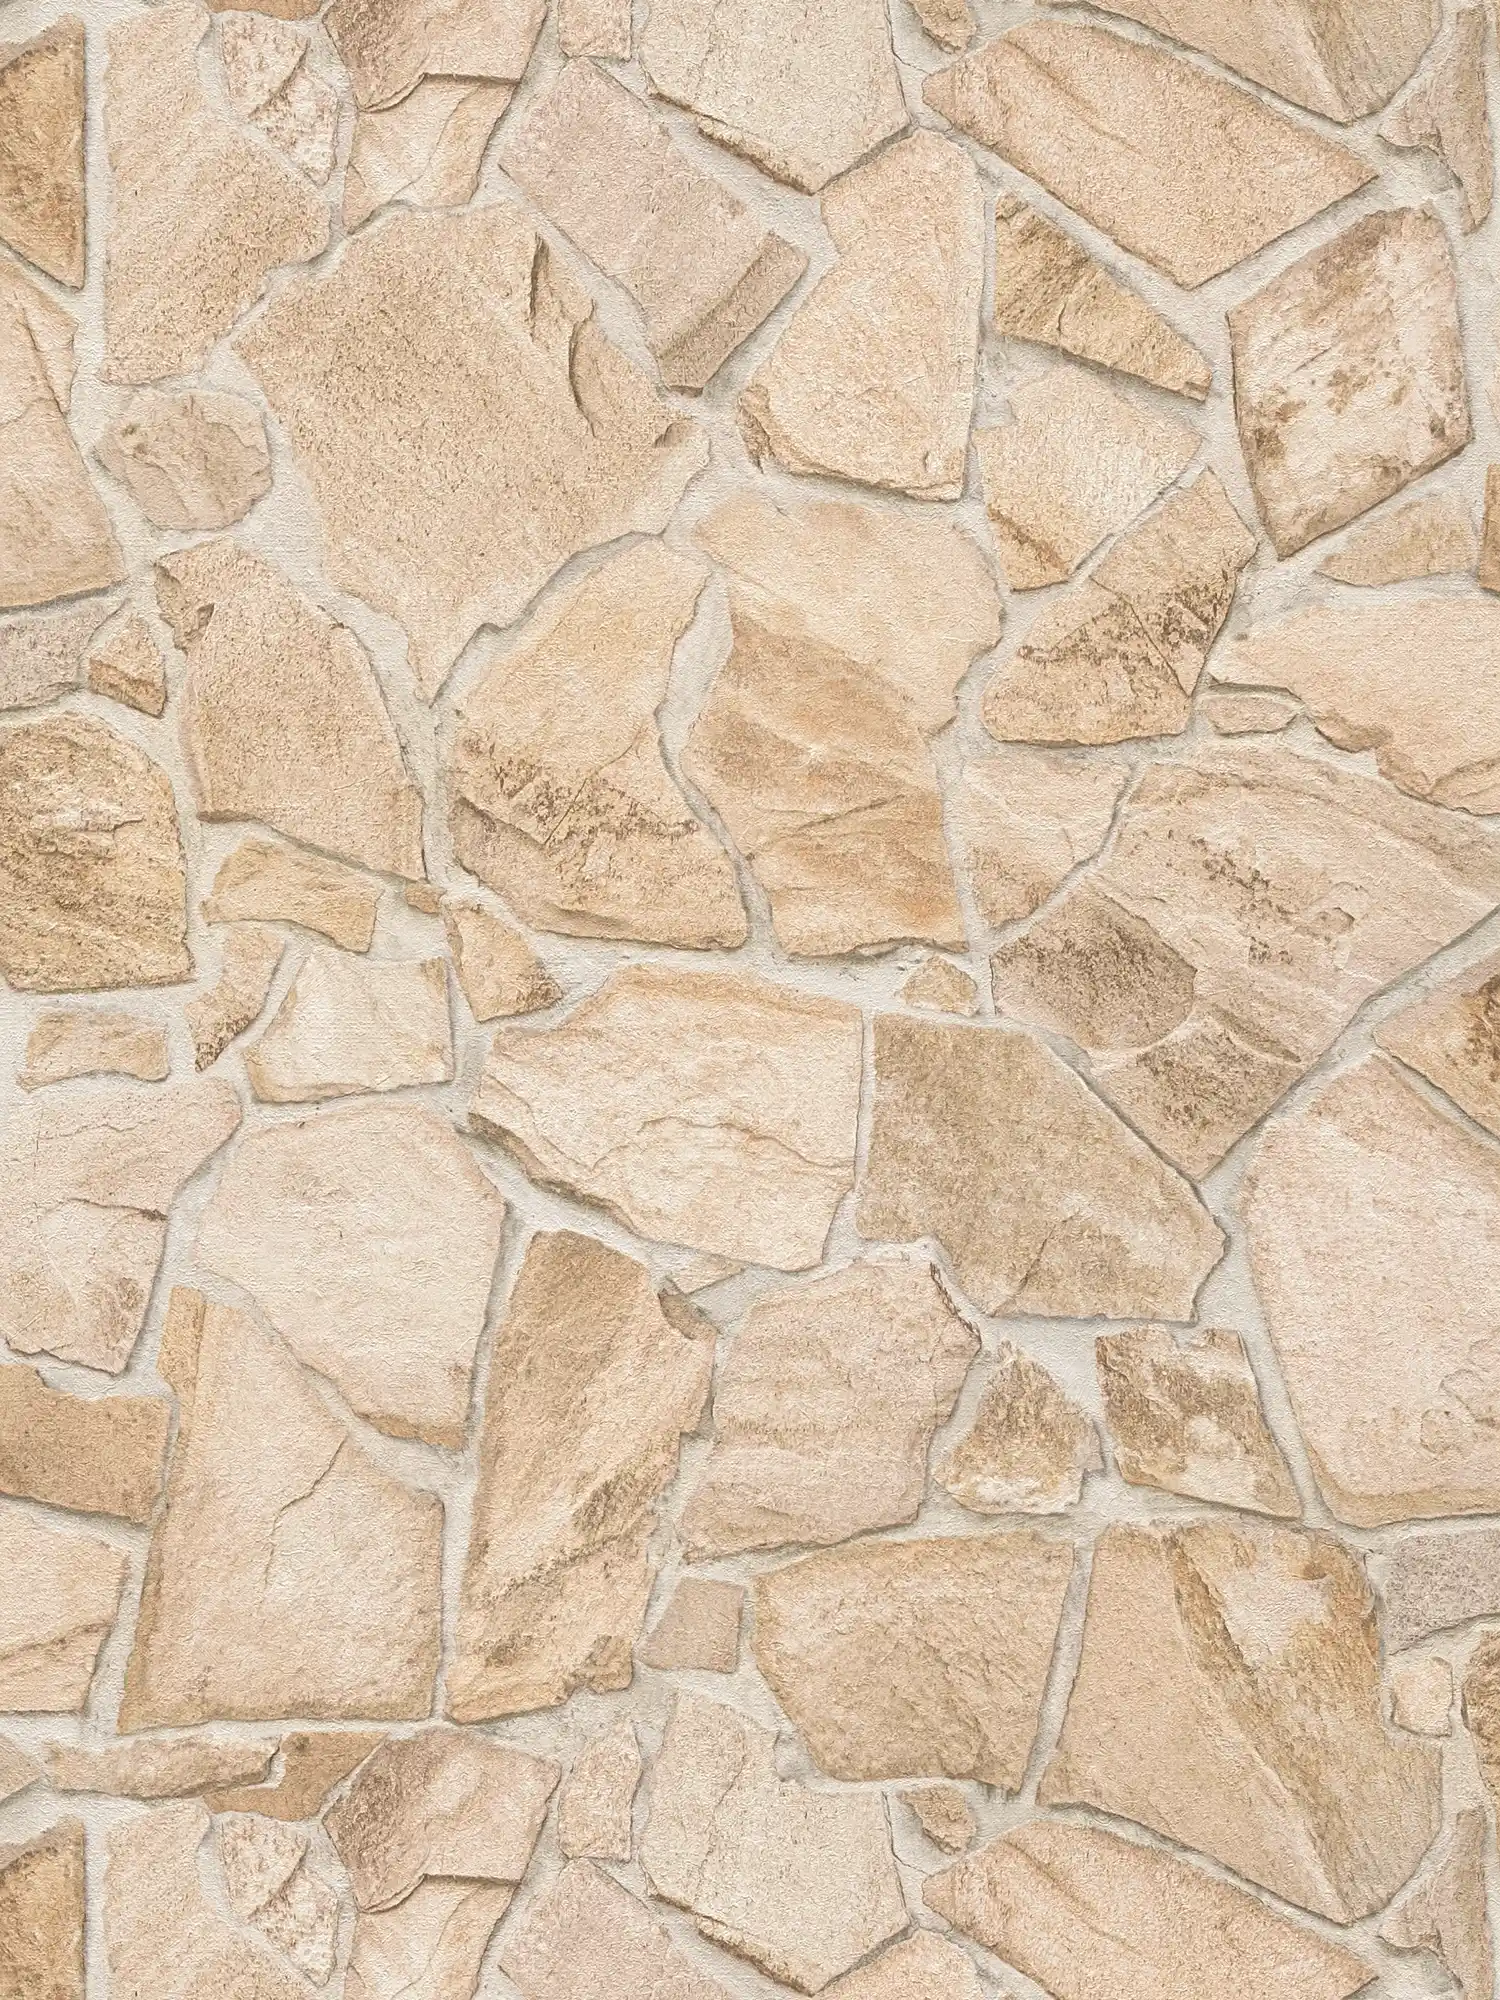         Stone Wall Wallpaper with 3D Optics - Beige, Brown
    